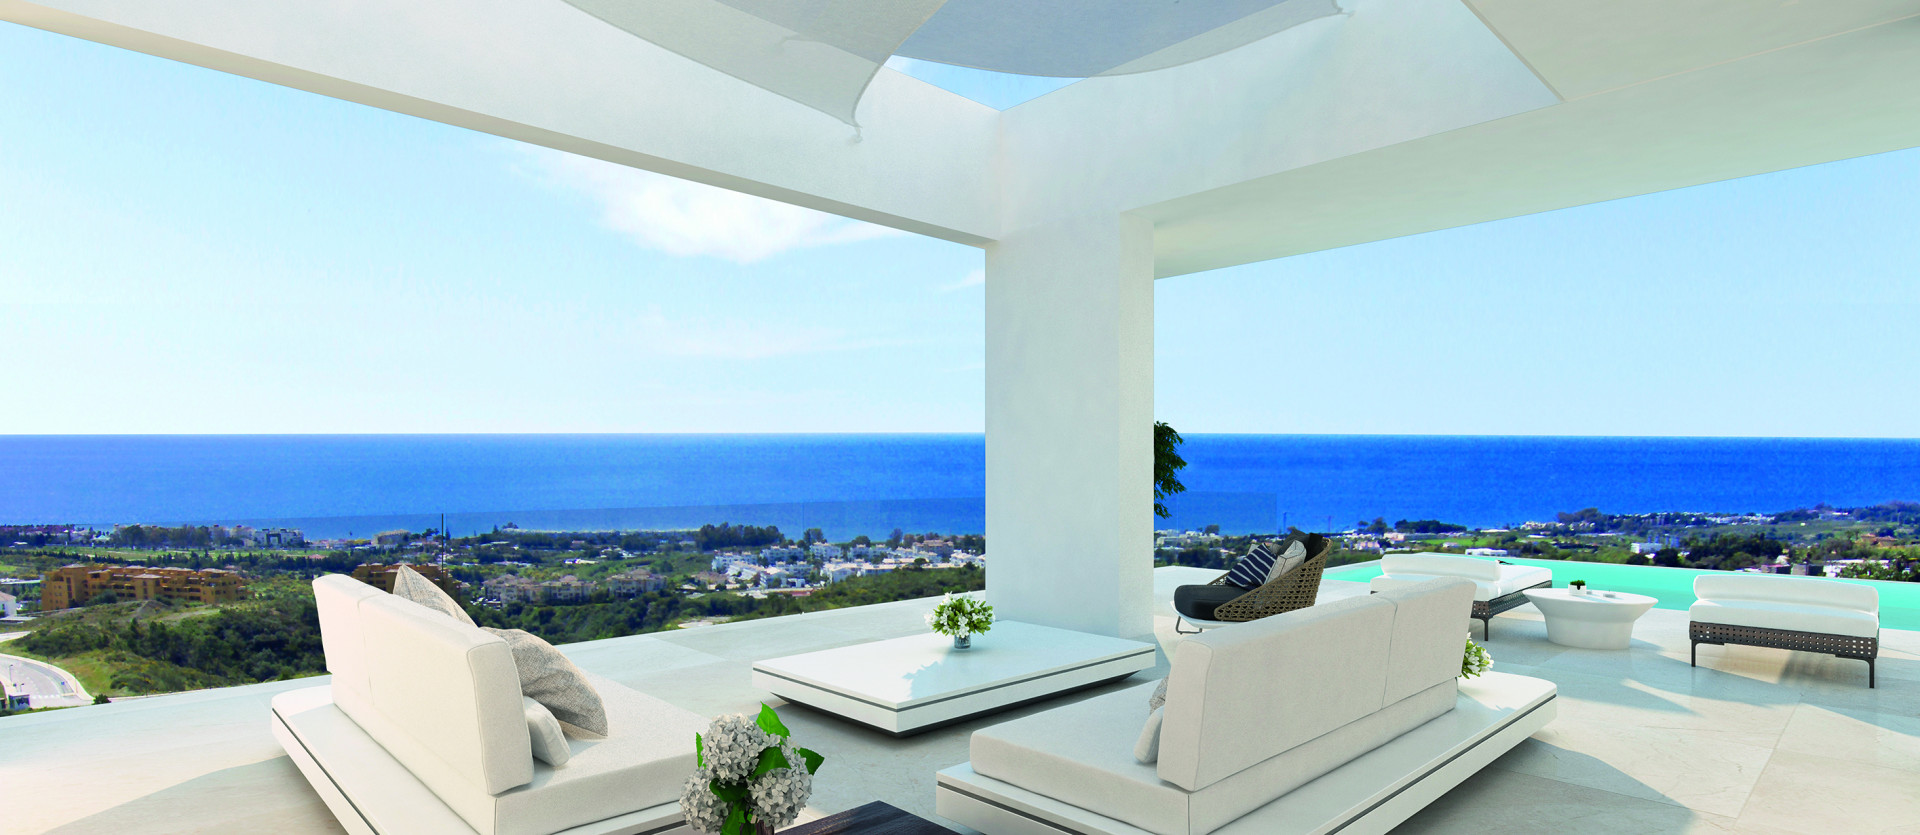 New modern contemporary villas for sale on the New Golden Mile Estepona